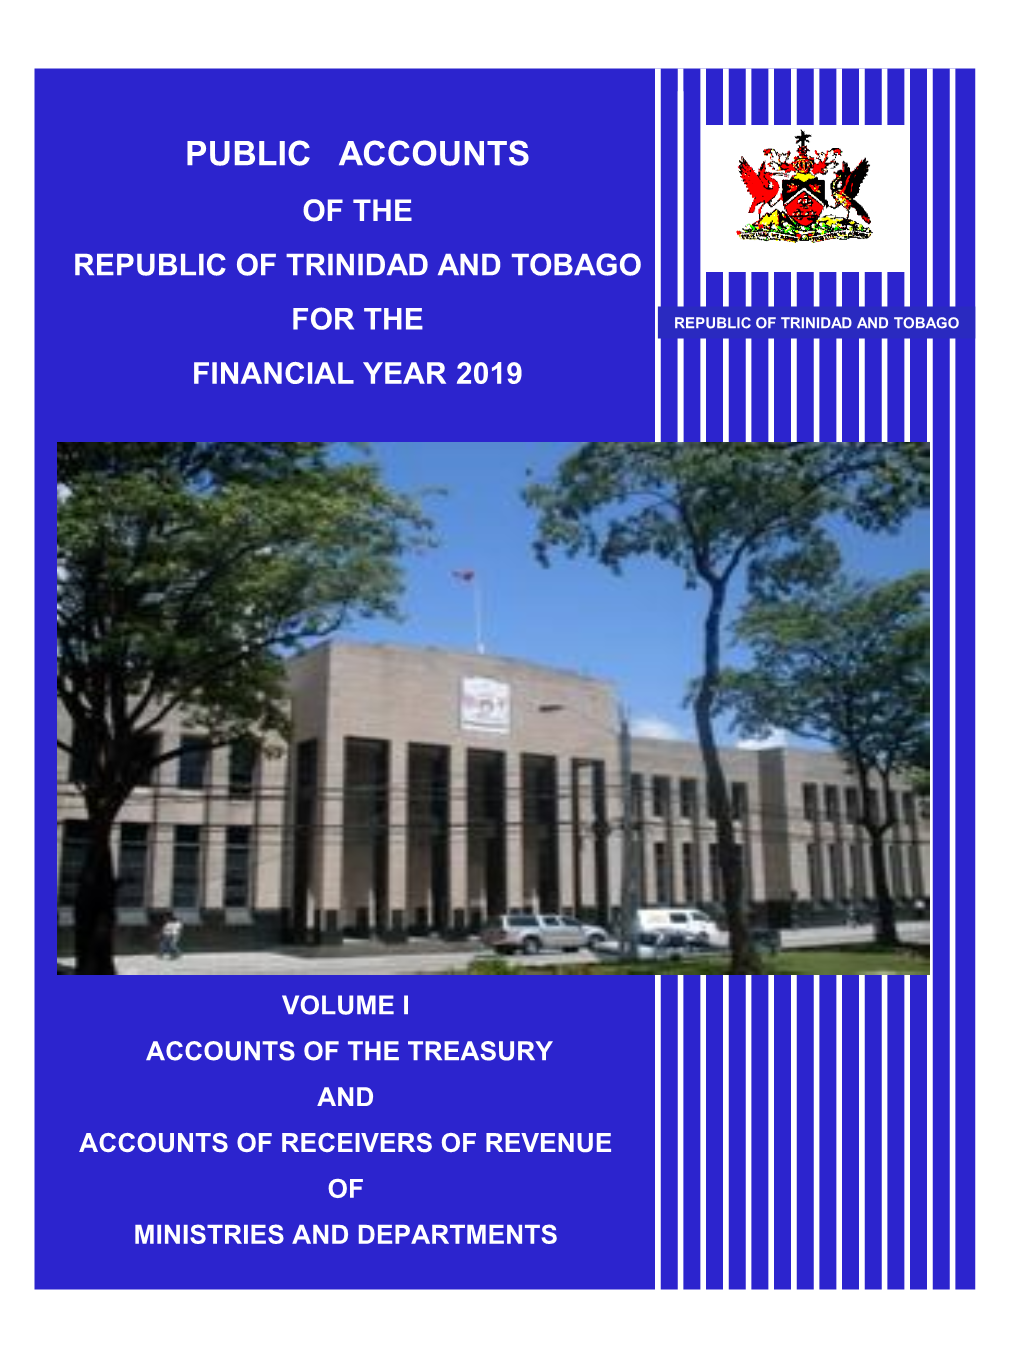 Public Accounts of the Republic of Trinidad and Tobago for the Financial